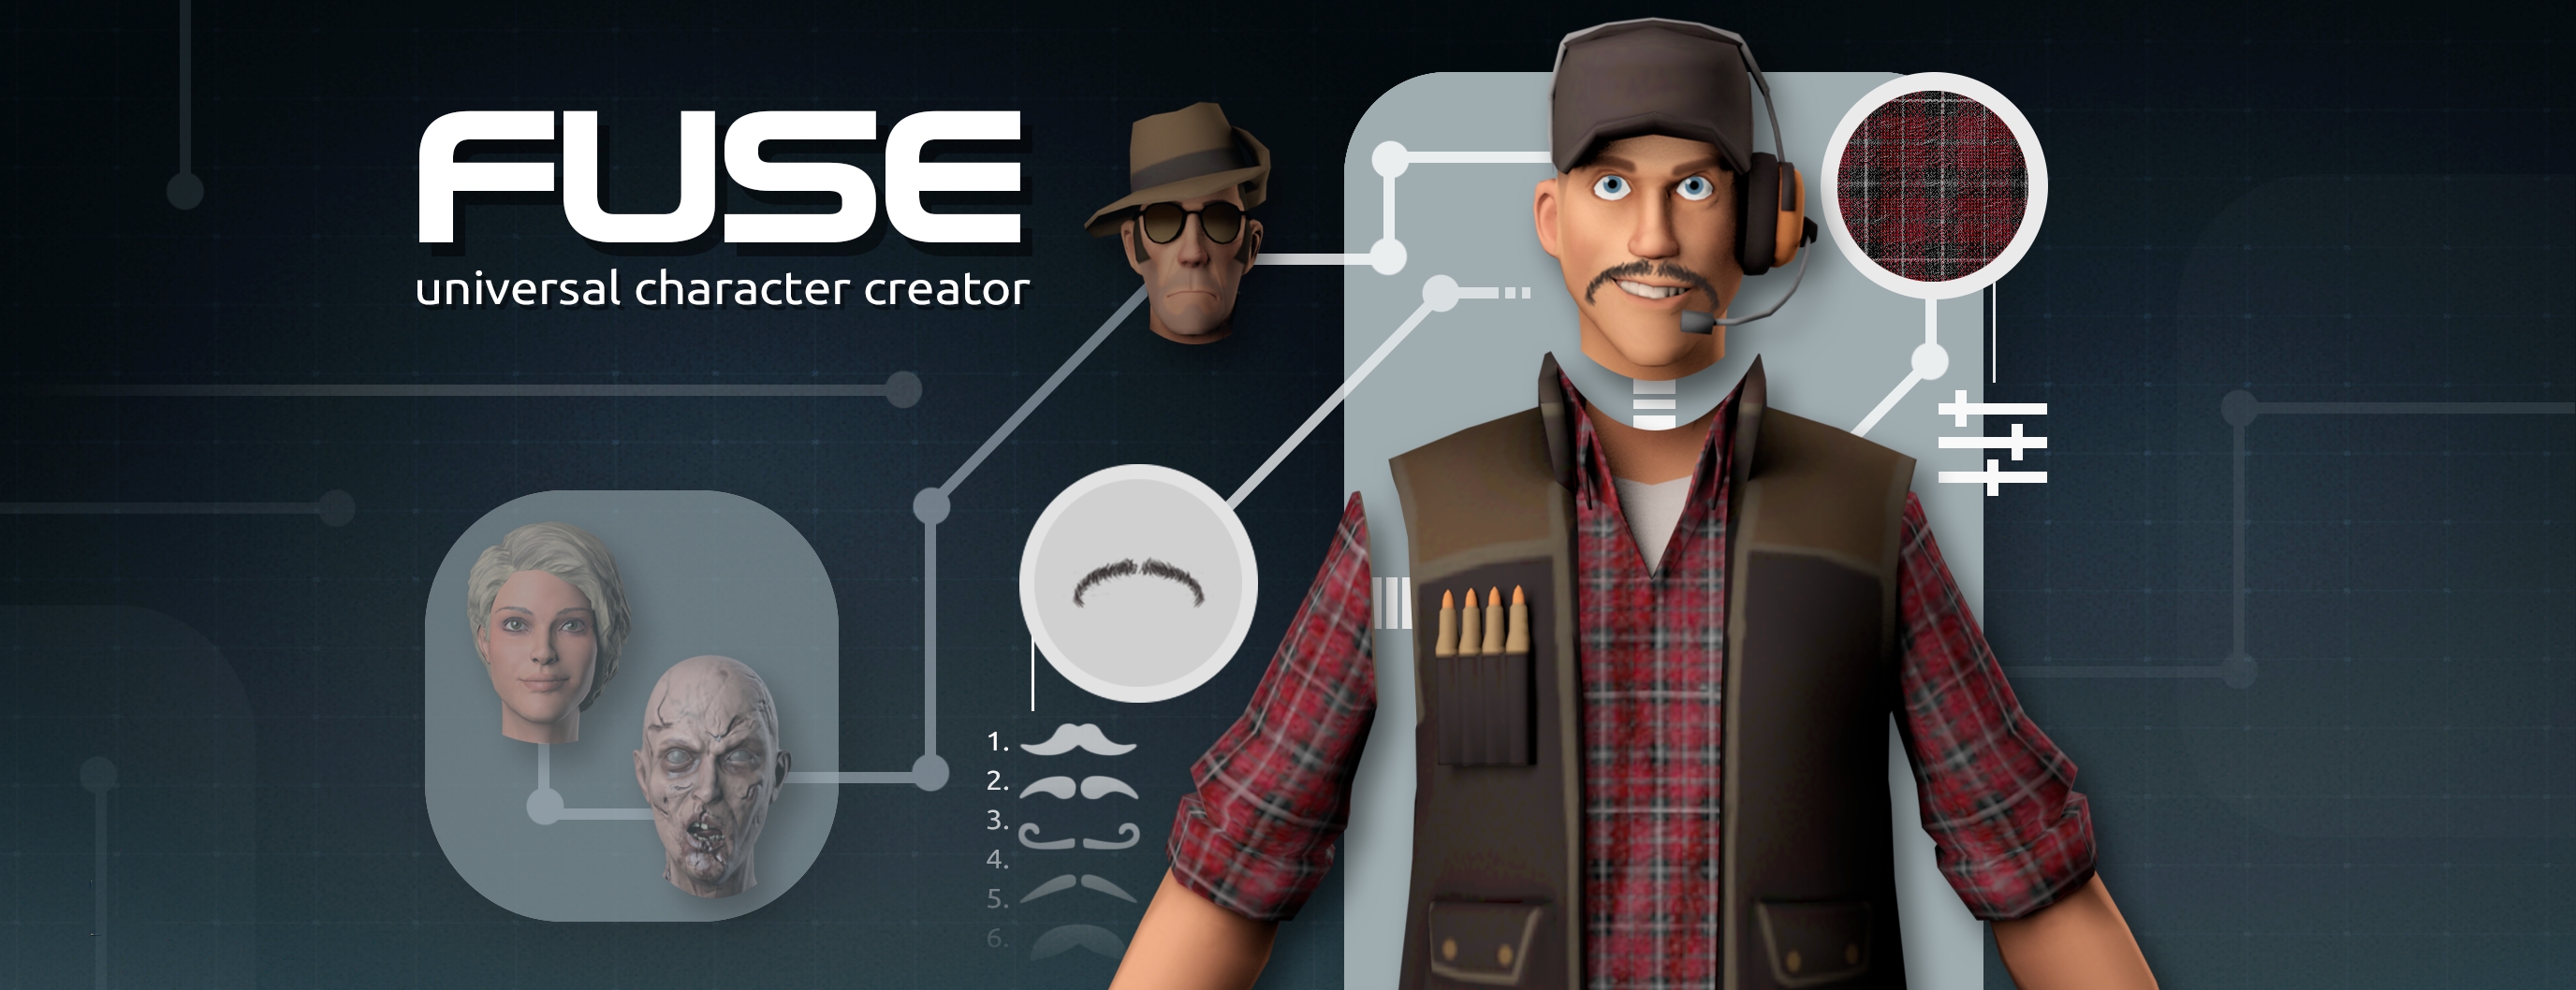 Mixamo Announces Fuse, the New Universal 3D Character ...